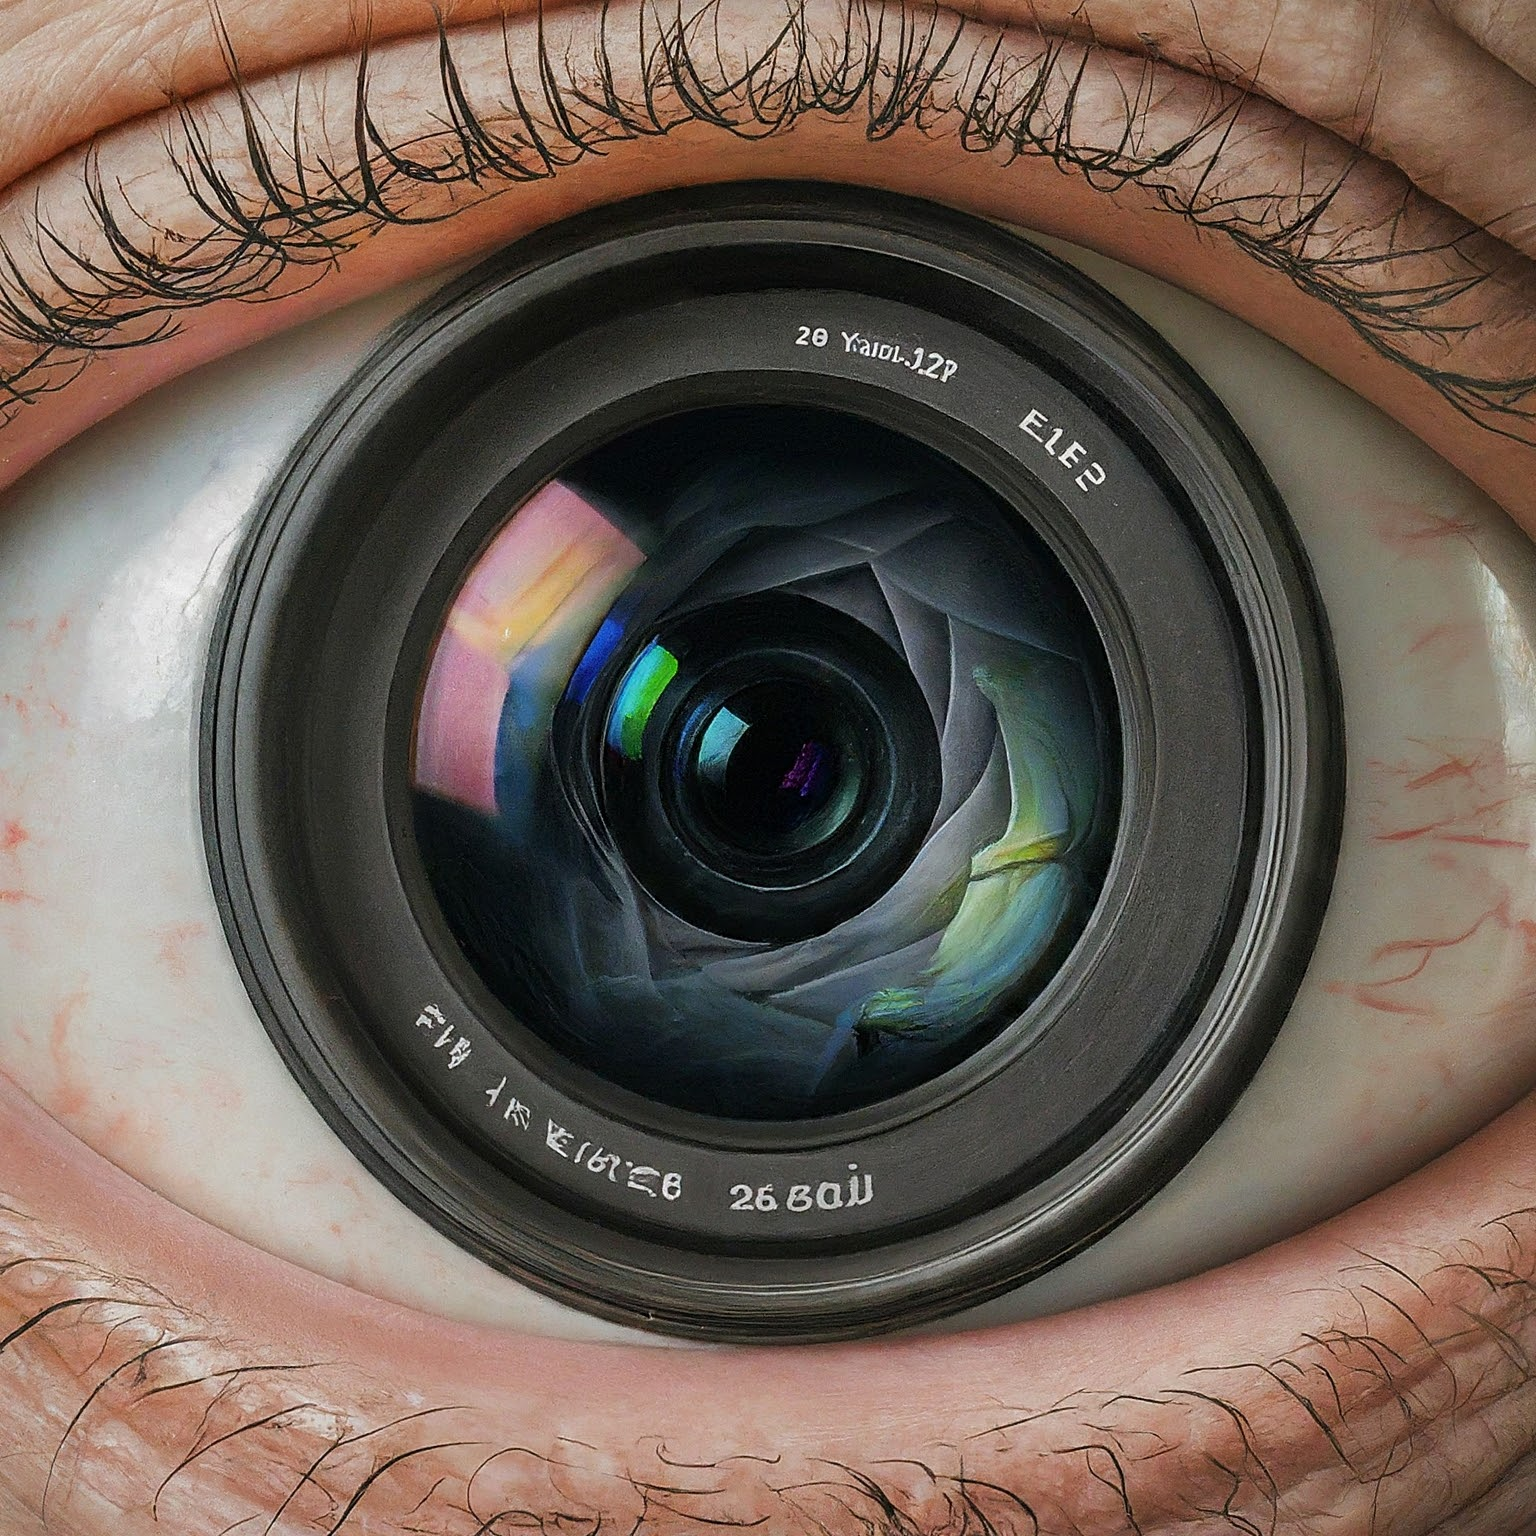 This image depicts a human eye with a camera lens replacing the iris, visually representing the concept of computer vision technology.